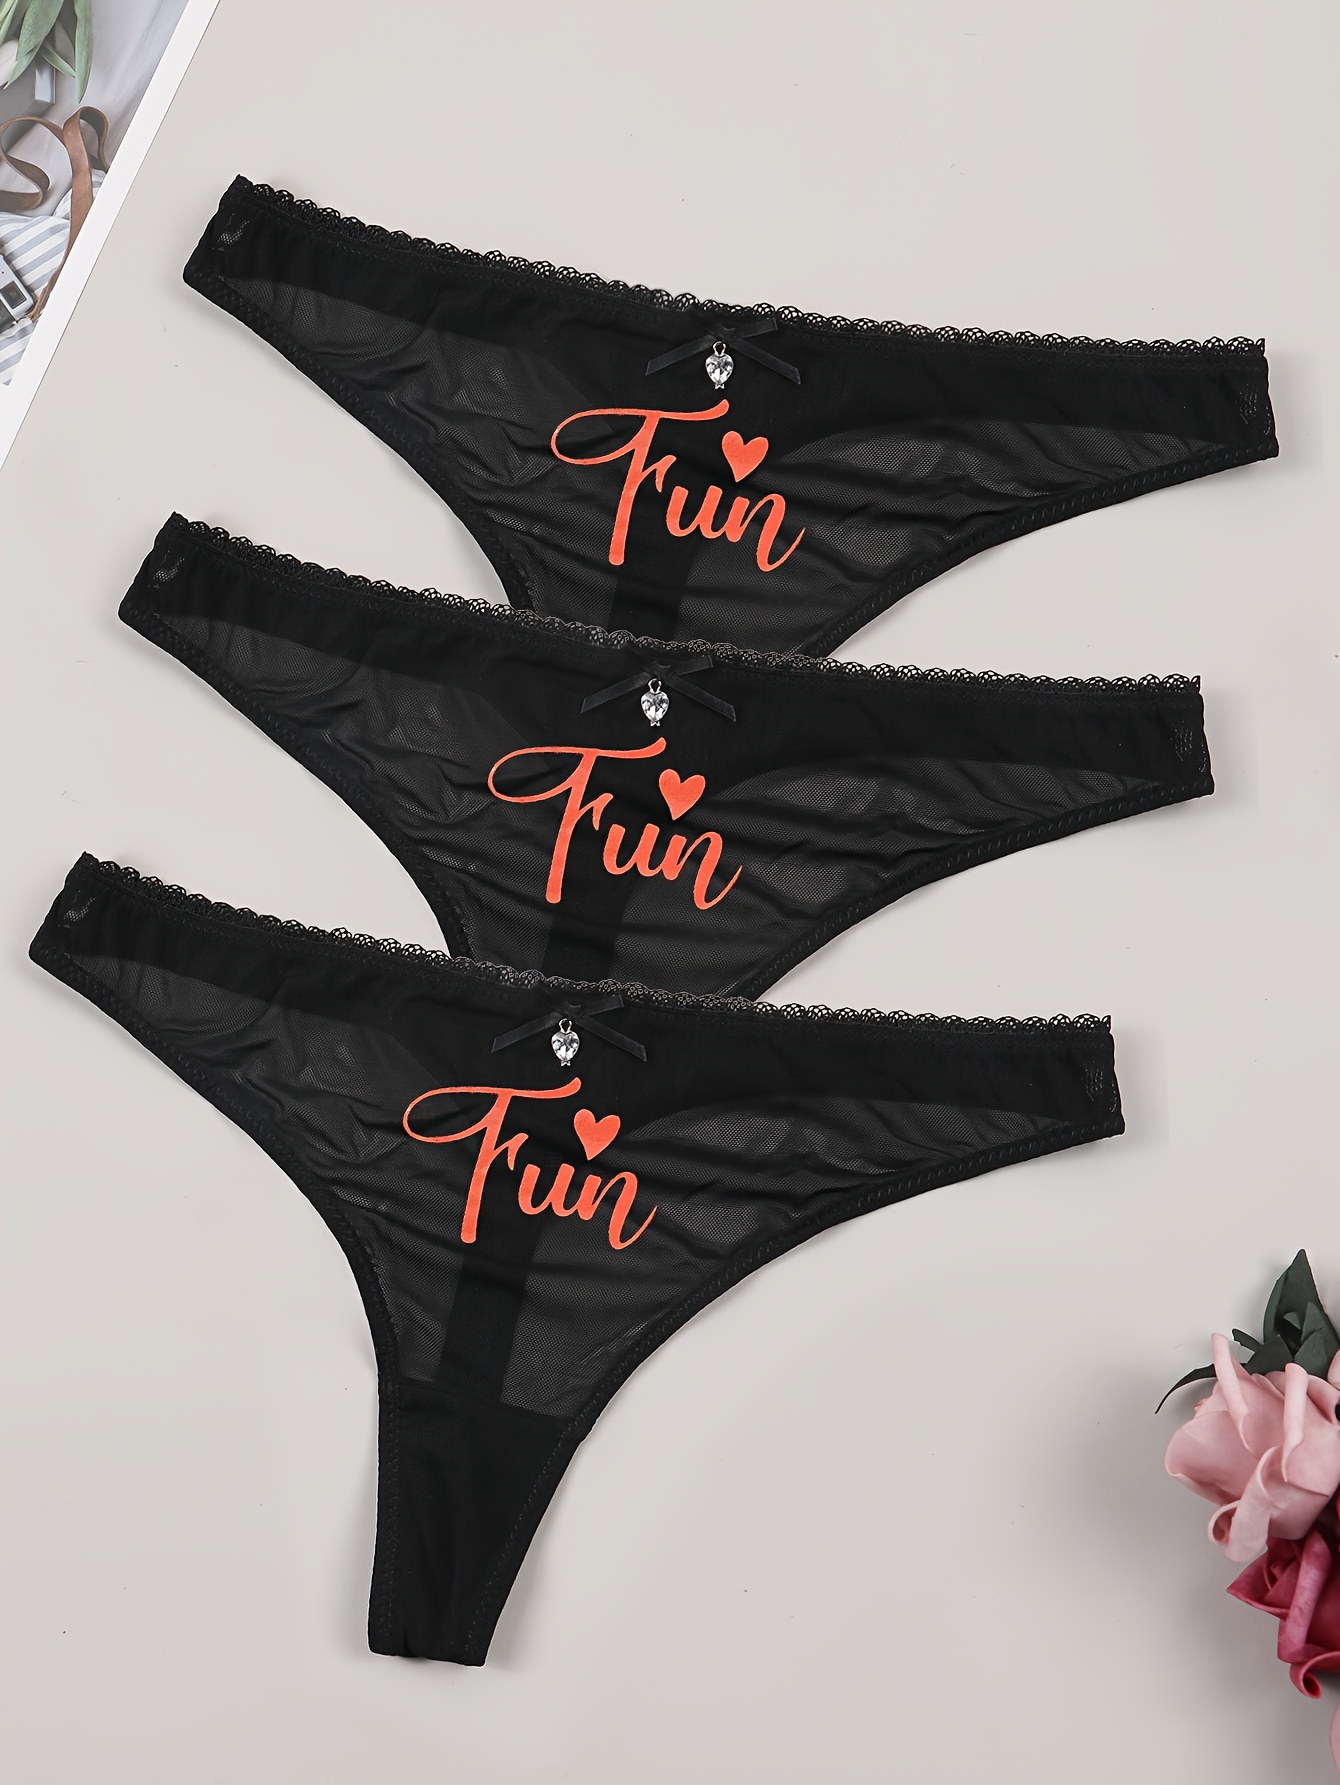 Funny Letter Sexy Lingerie G-string Briefs Underwear Panties